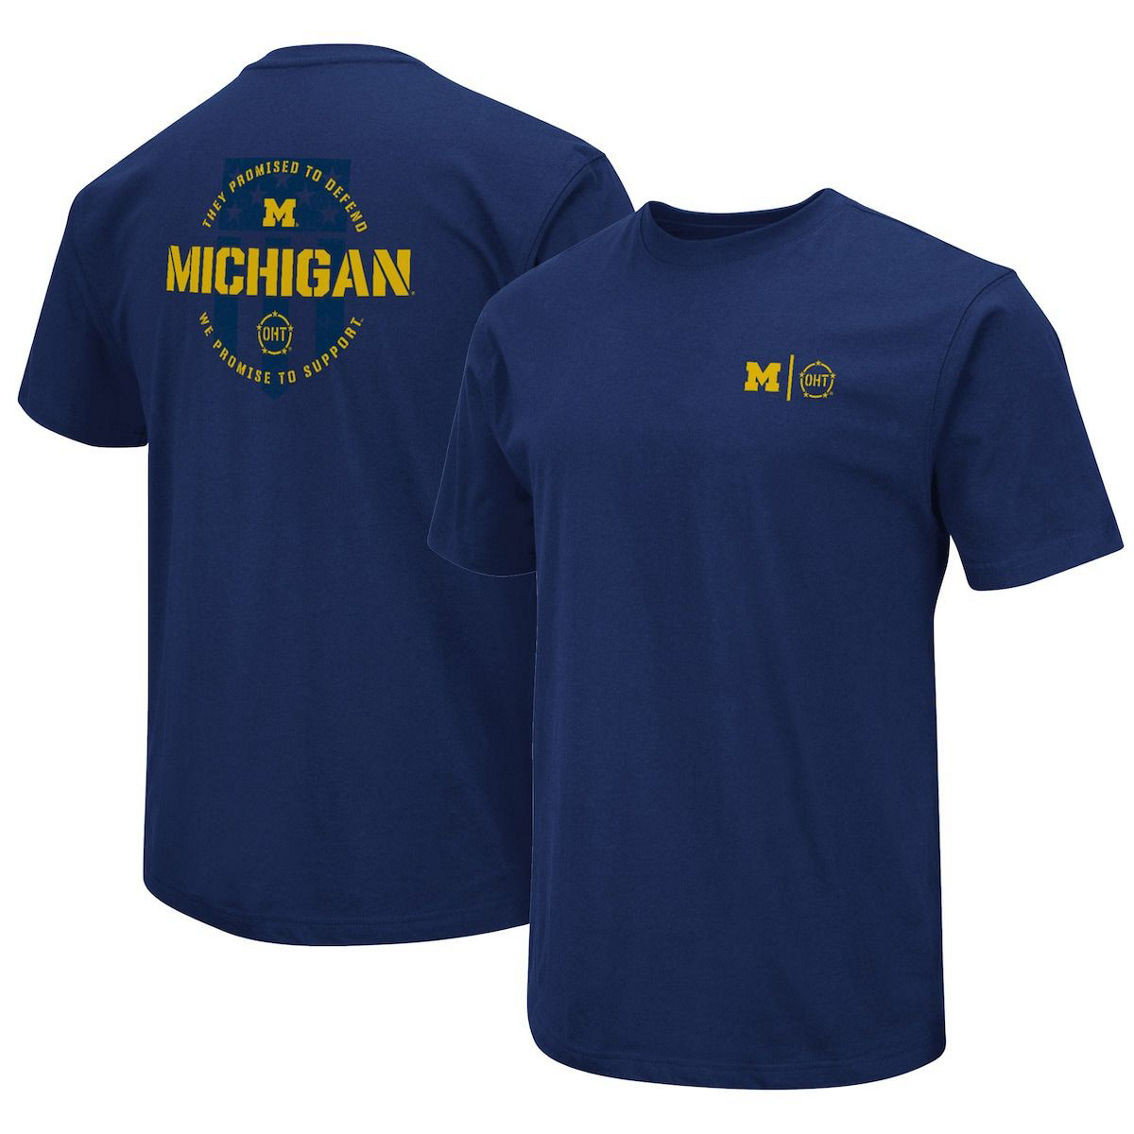 Colosseum Men's Navy Michigan Wolverines OHT Military Appreciation T-Shirt - Image 2 of 4